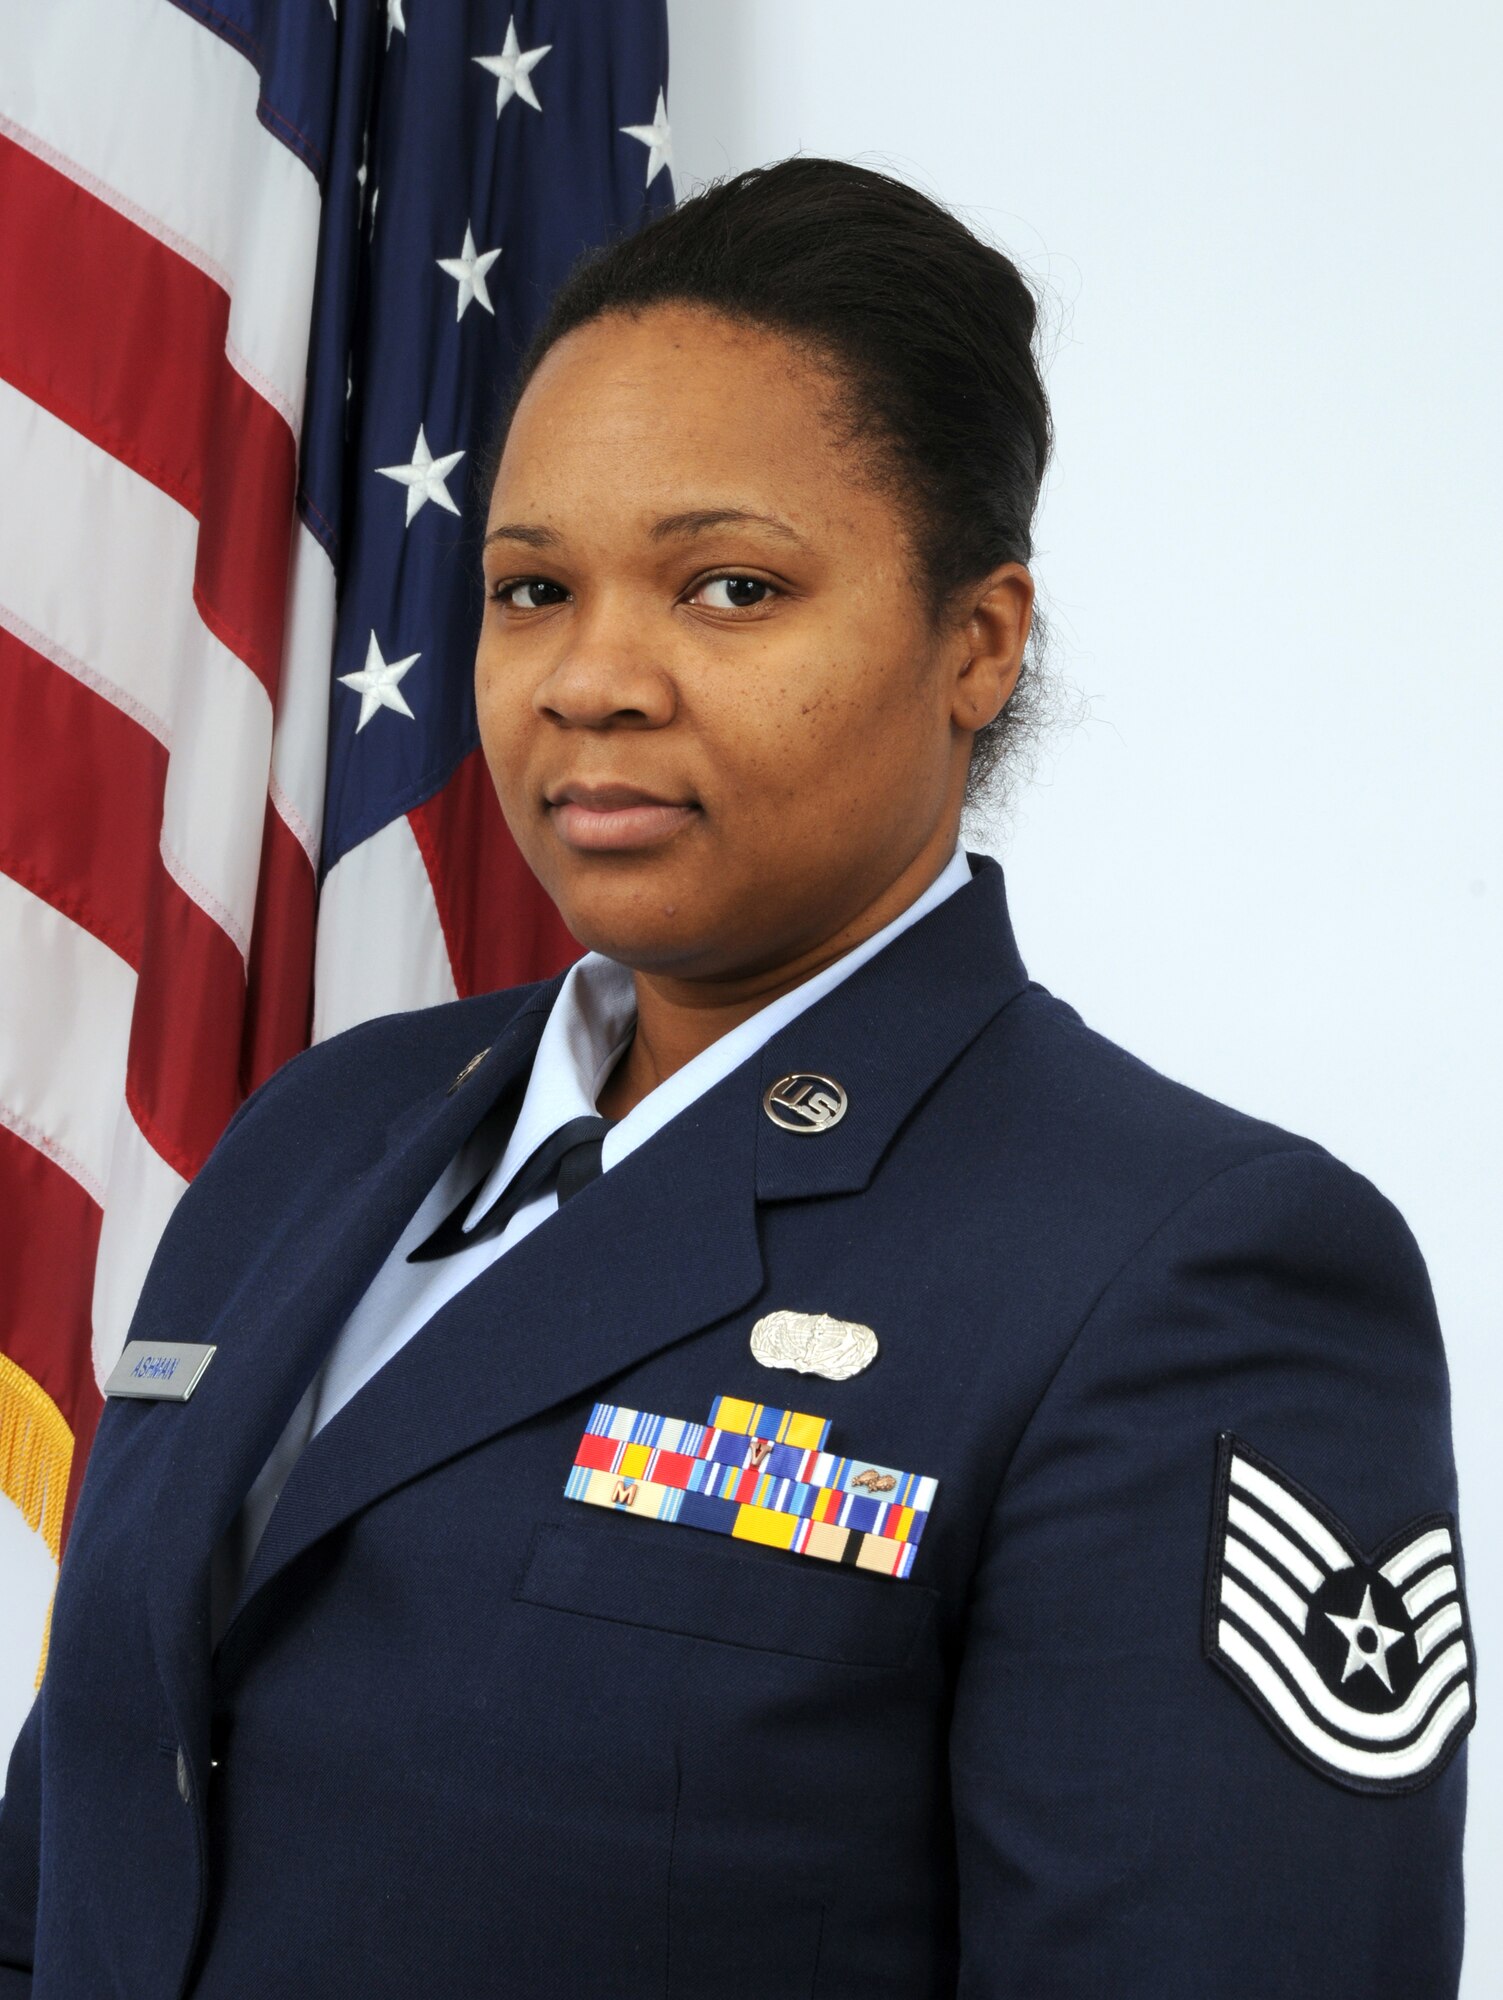 Technical Sgt. Tracy Ashman, a member of the 166th Force Support Squadron, 166th Airlift Wing, New Castle, Del., is the Delaware Air National Guard's FY 2009 Noncommissioned Officer of the Year. Sgt. Ashman, a resident of Bear, Del., is a services specialist in the 166th FSS, and deployed to Southwest Asia for six months in 2003 to Al Minhad Air Base, United Arab Emirates. She is a full-time nurse in the medical intensive care unit at Christiana Hospital, Del., holds an M.B.A. in health care, and is pursuing an additional masters degree in nursing and education. (U.S. Air Force photo/Senior Master Sgt. Gerald Dougherty, Delaware ANG)